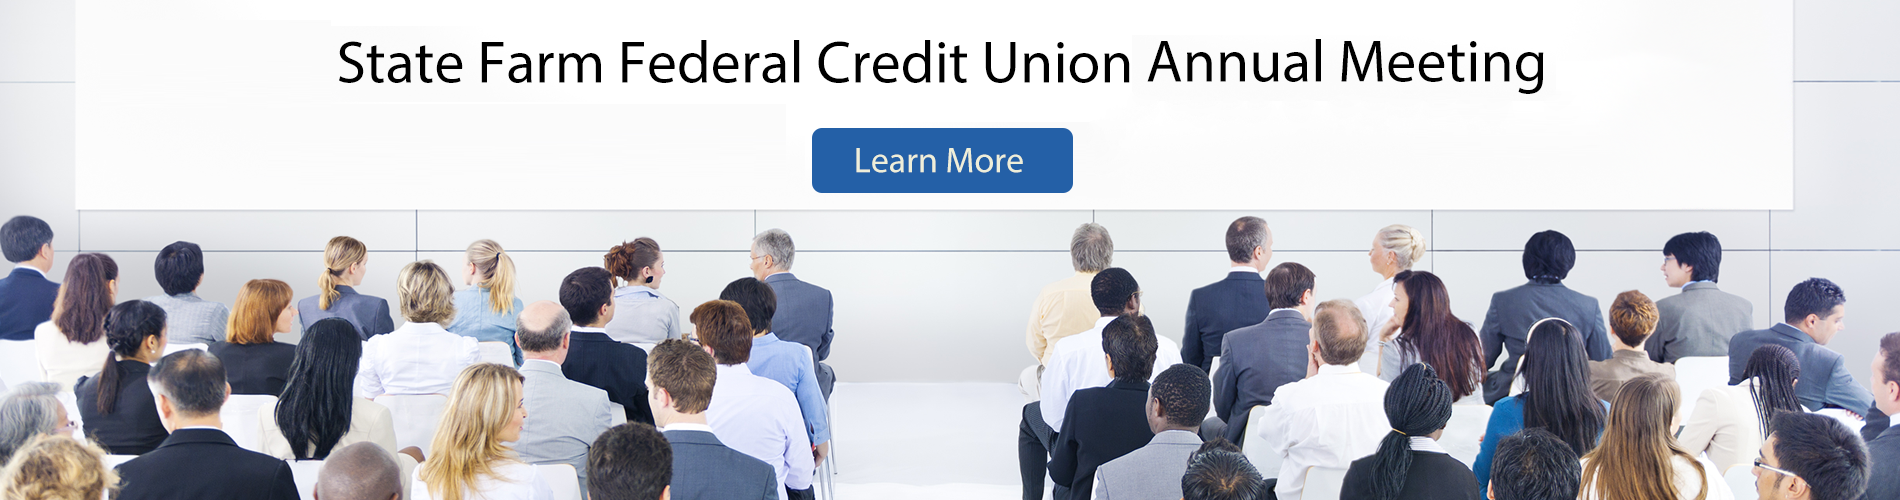 State Farm Federal Credit Union Annual Meeting - Learn More